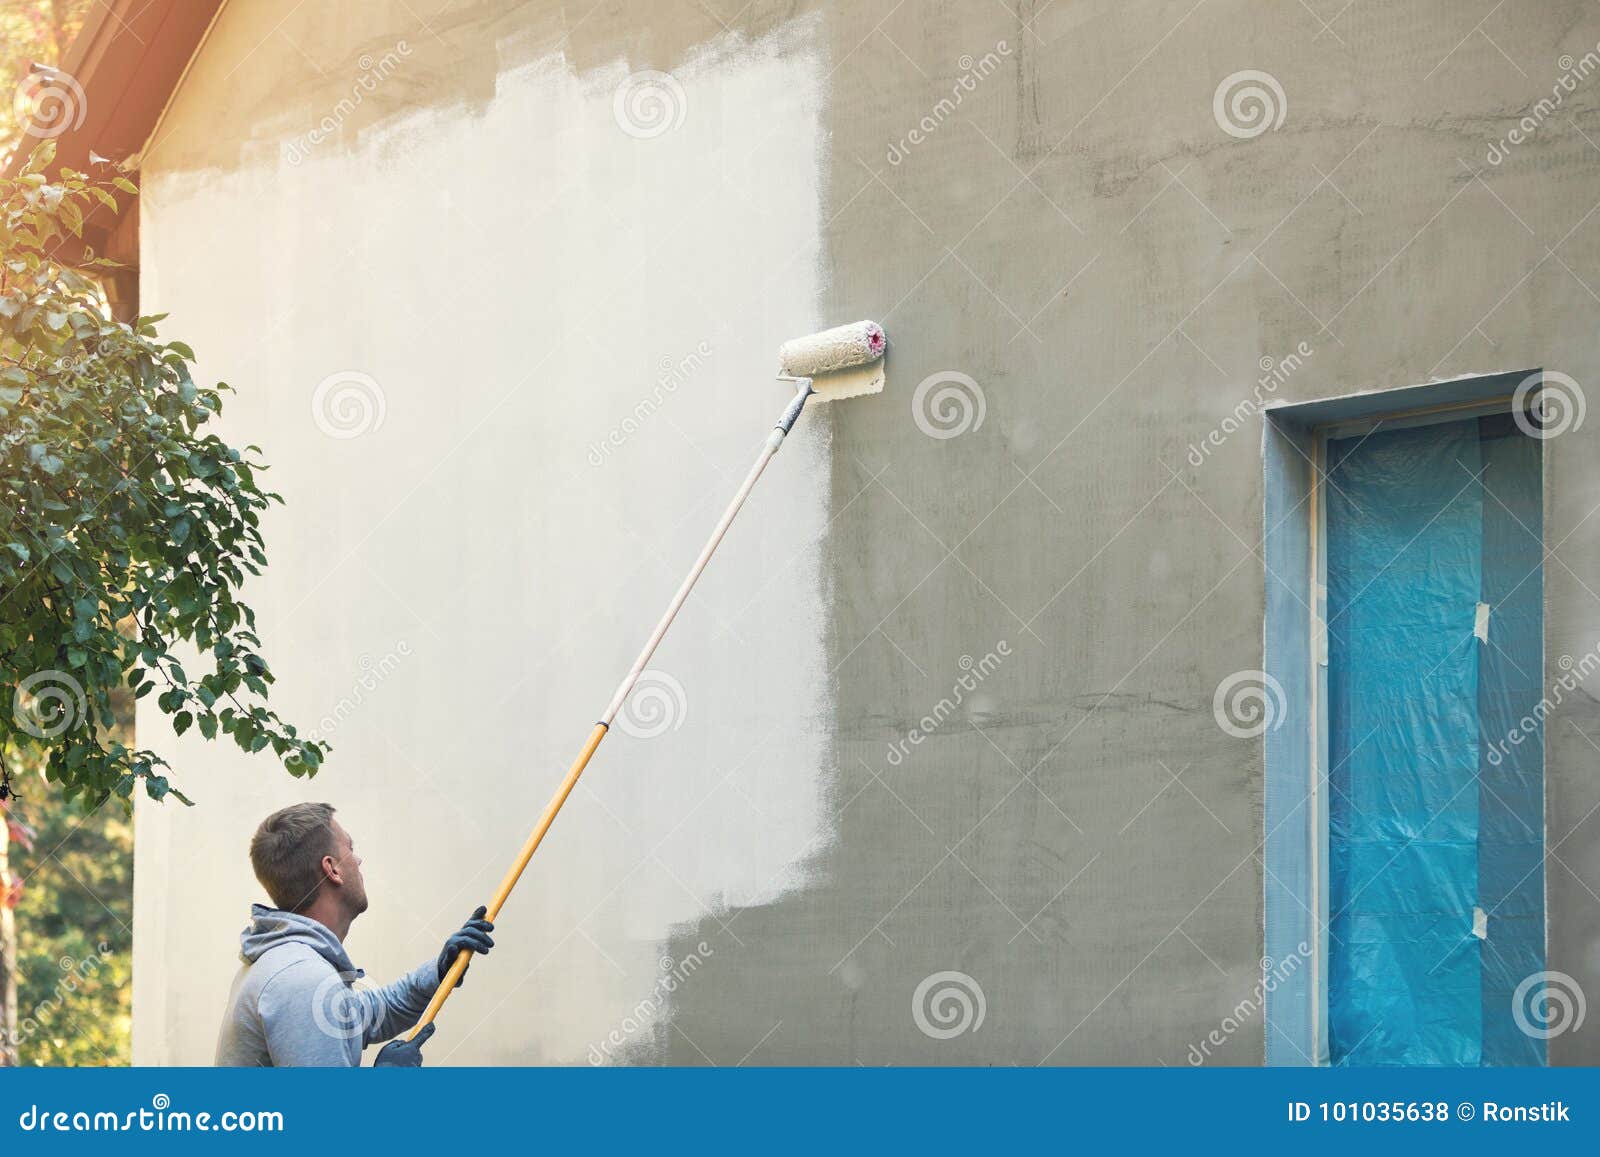 house painter painting building exterior with roller